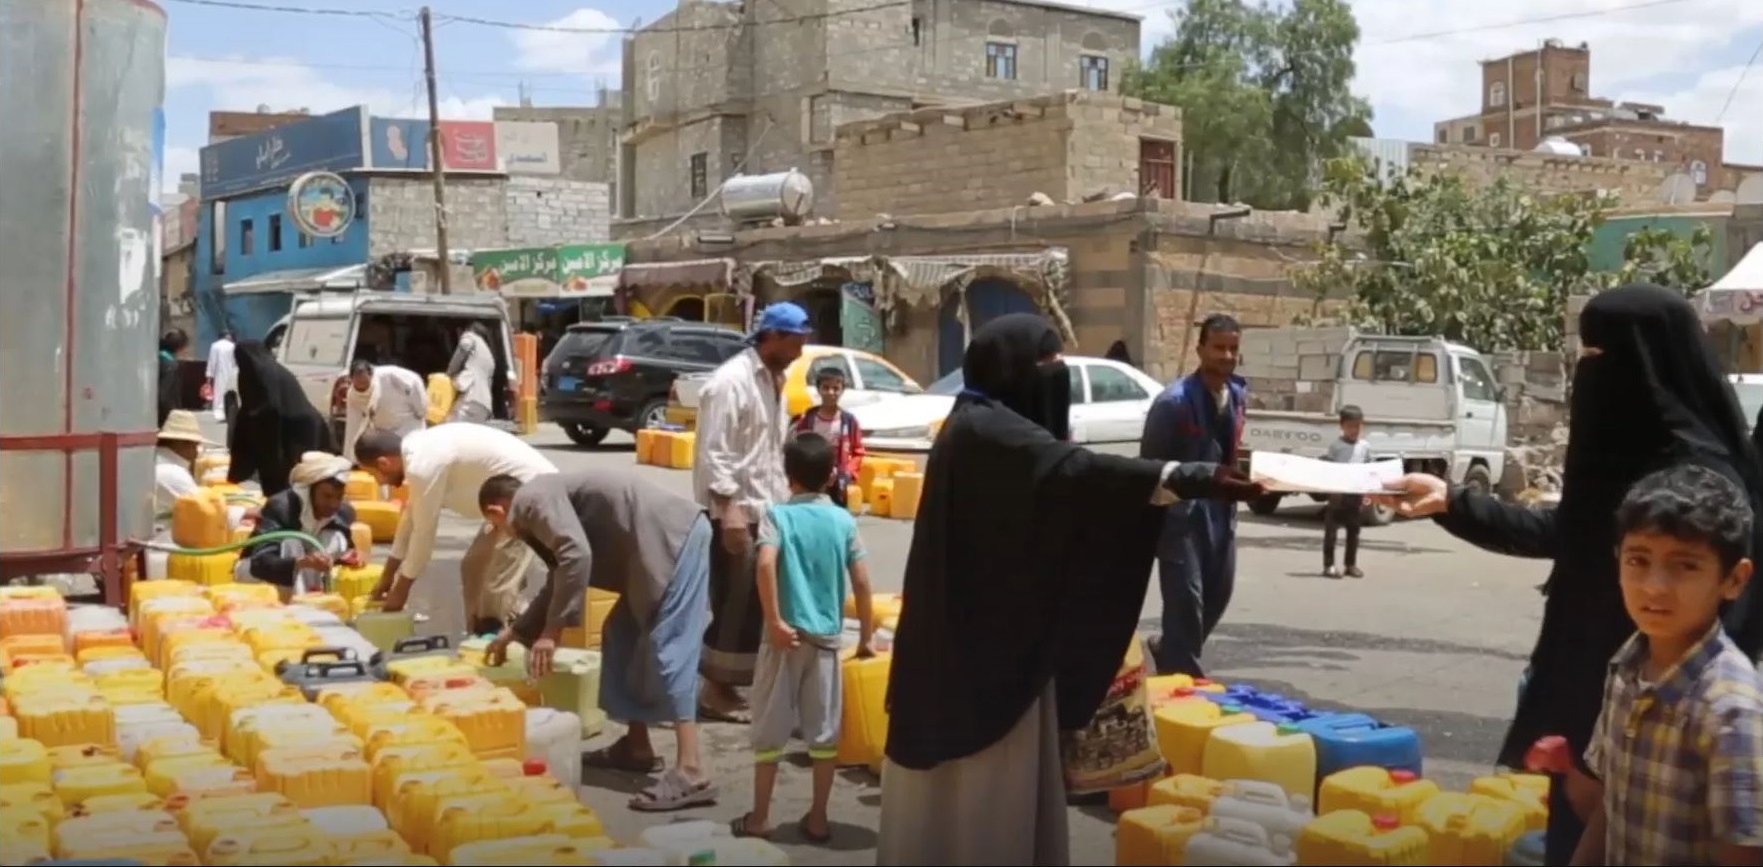 A group of people in Yemen gather around yellow and blue containers with clean water. Image description: A group of people in Yemen gather around yellow and blue containers with clean water.